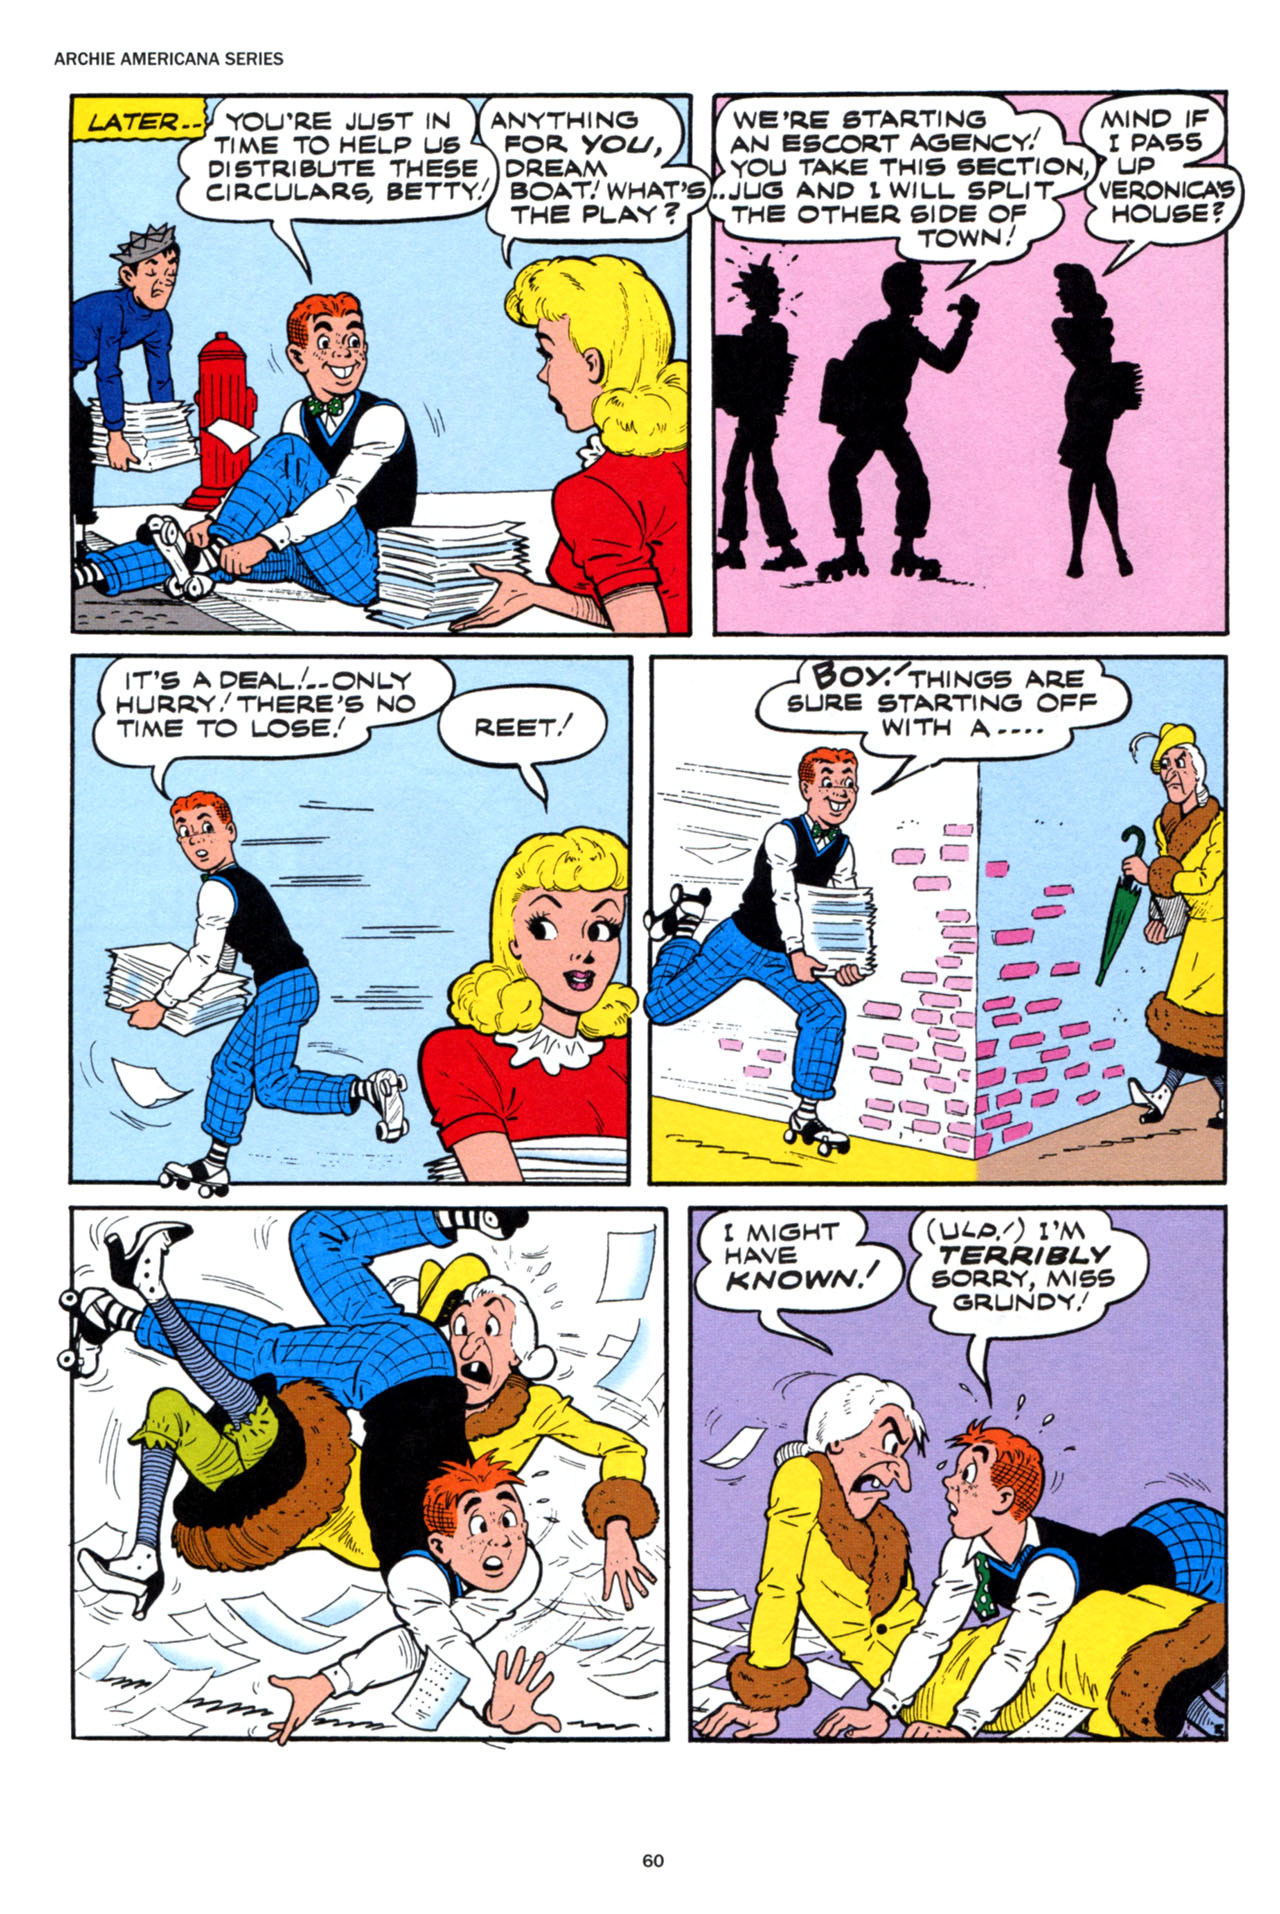 Read online Archie Americana Series comic -  Issue # TPB 6 - 61